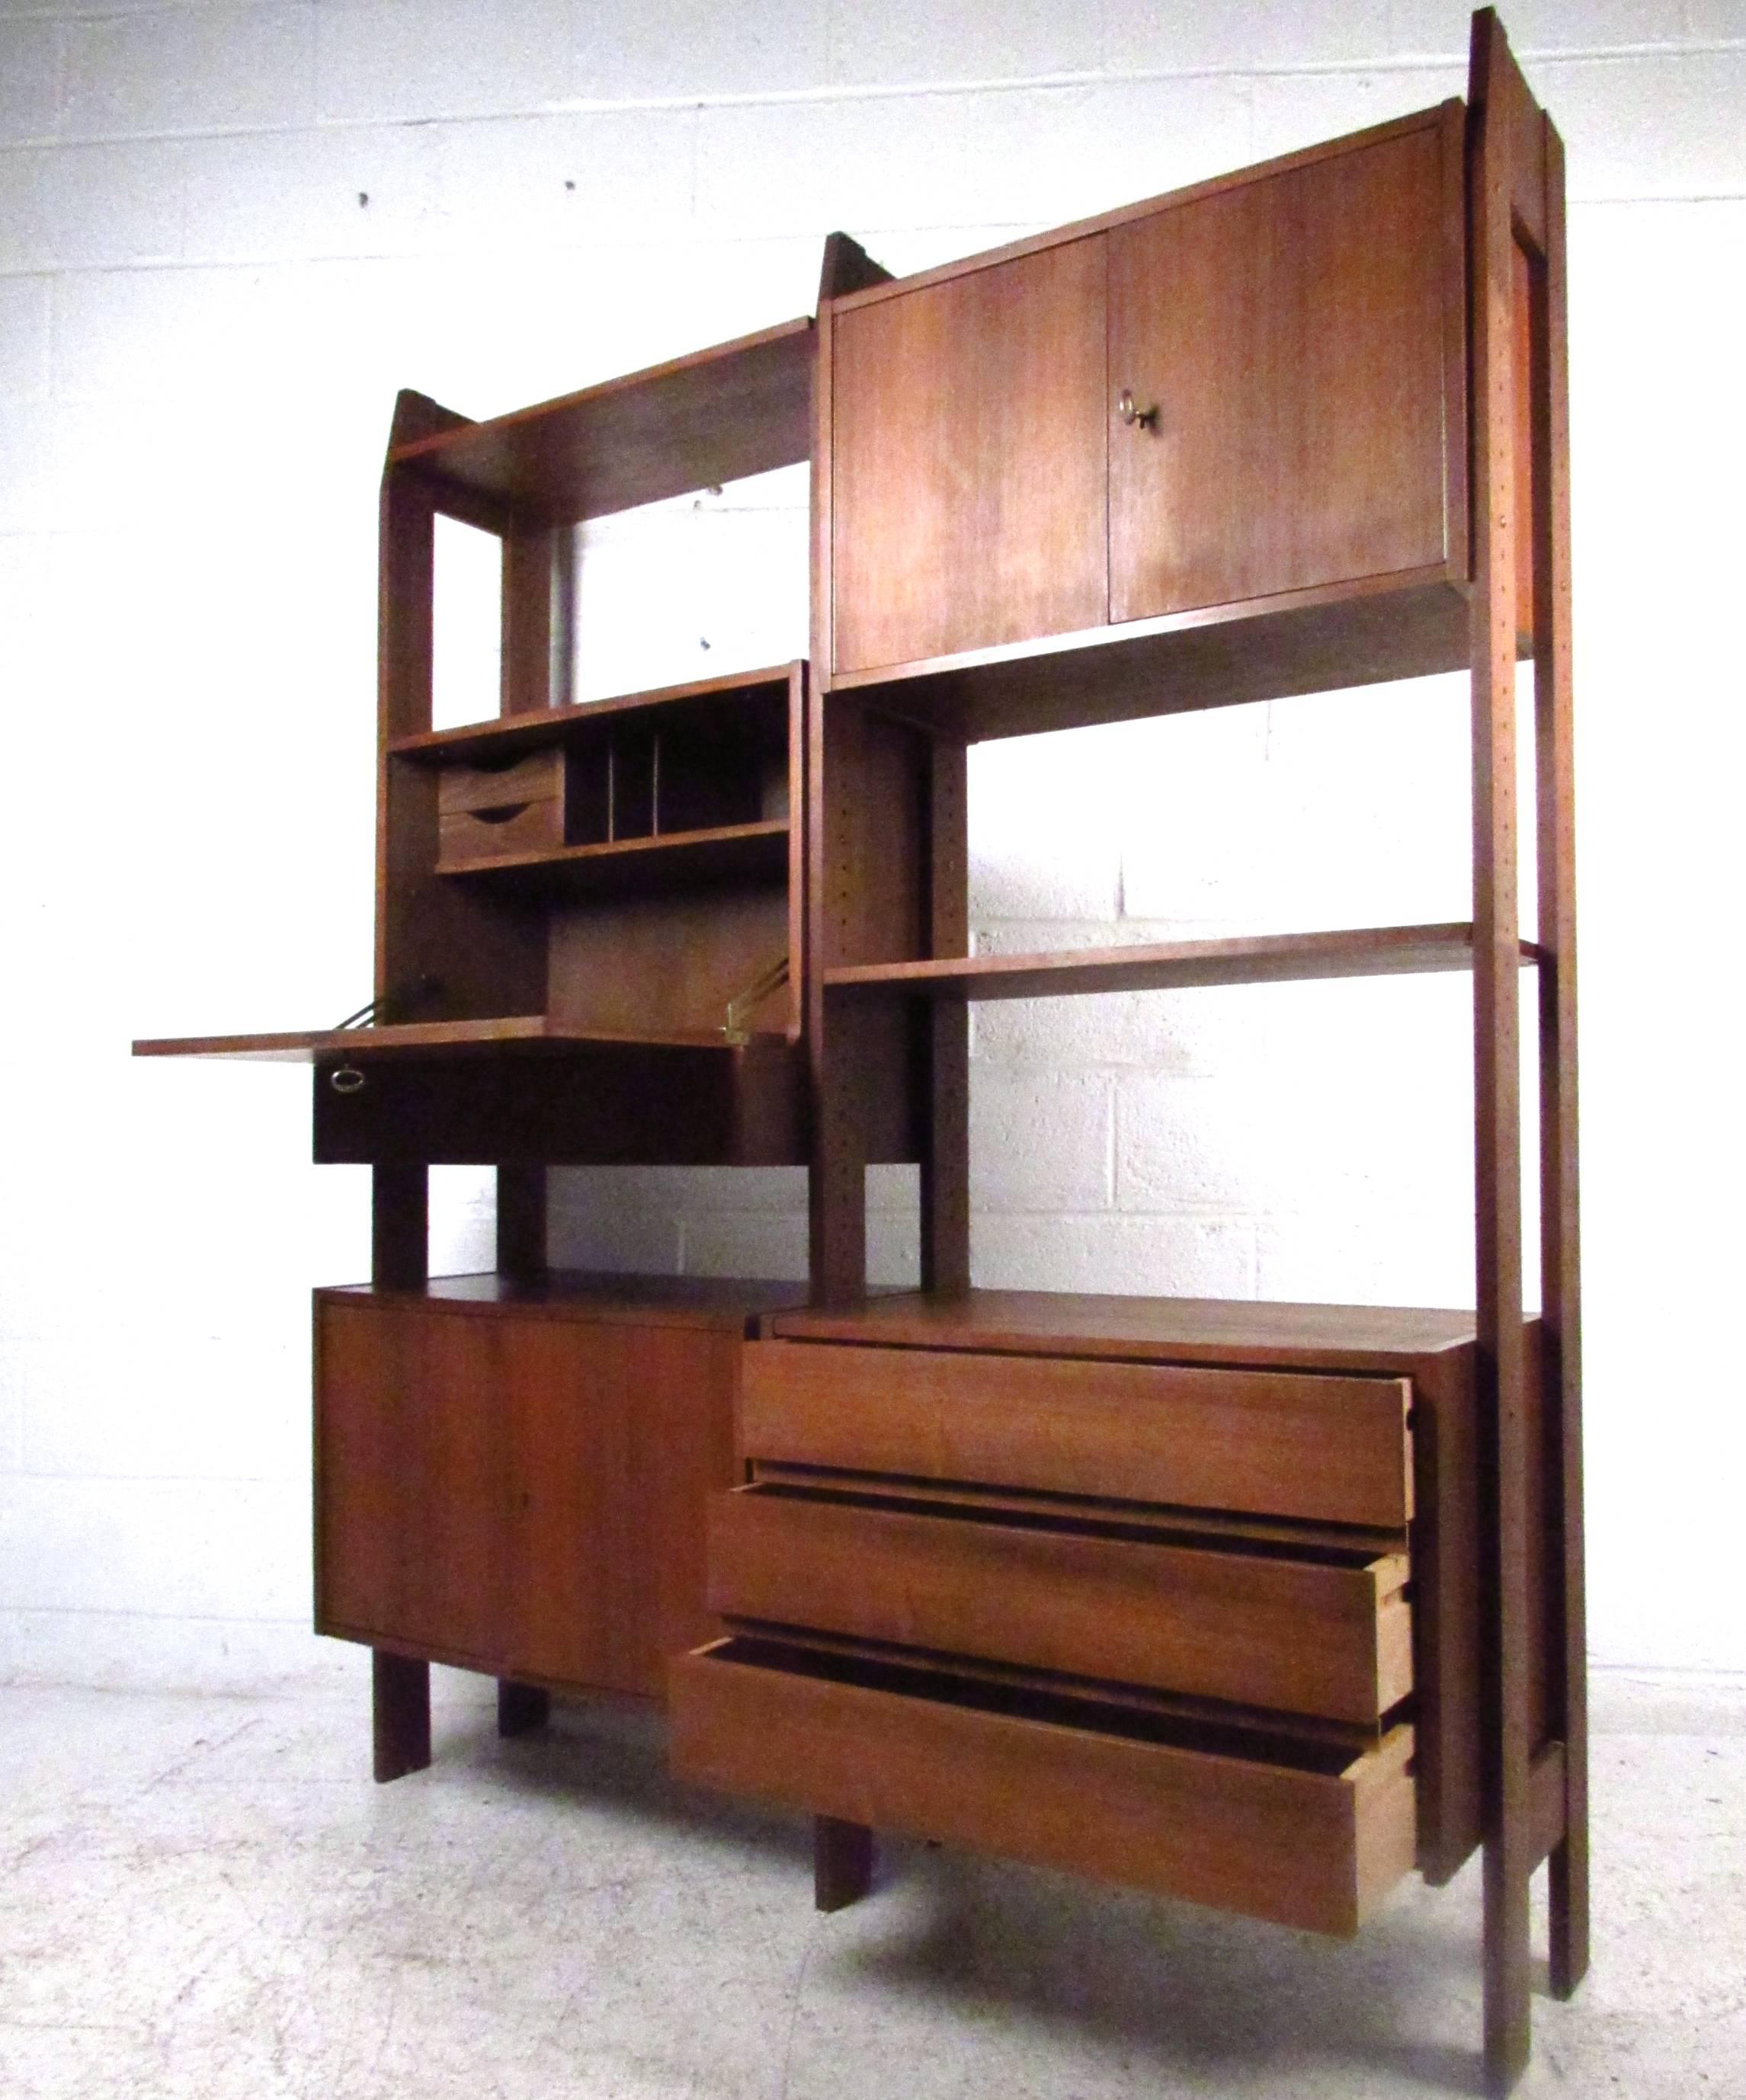 This walnut wall unit can be arranged in any formation you desire, and provide a unique combination of storage, display, and workspace. Please confirm item location (NY or NJ).